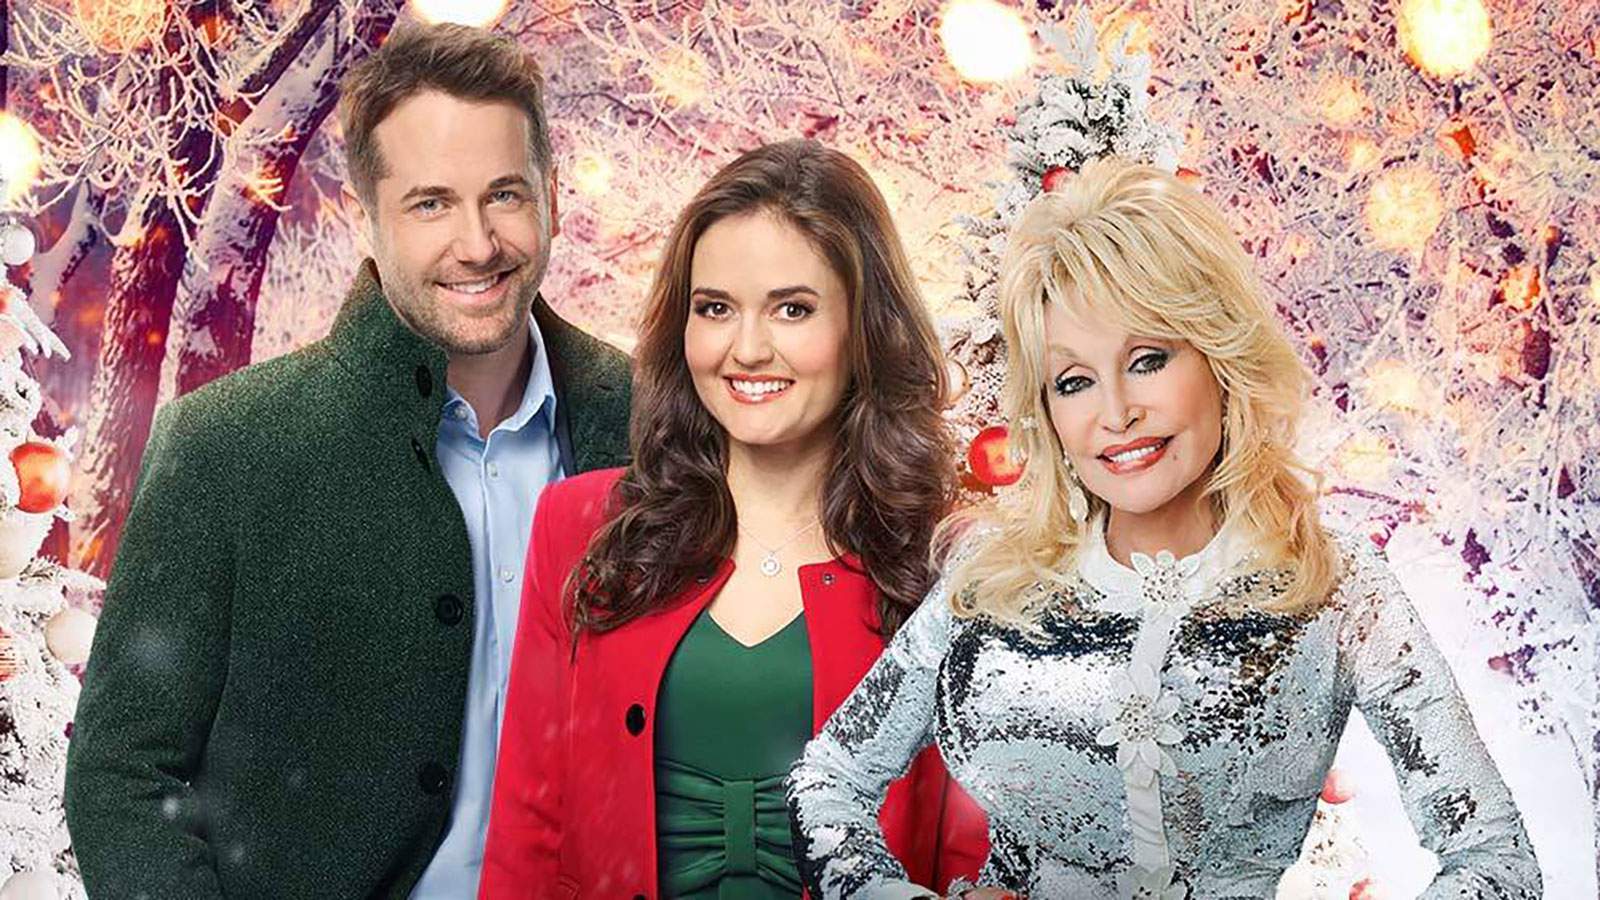 Christmas in July is happening on Hallmark Channel